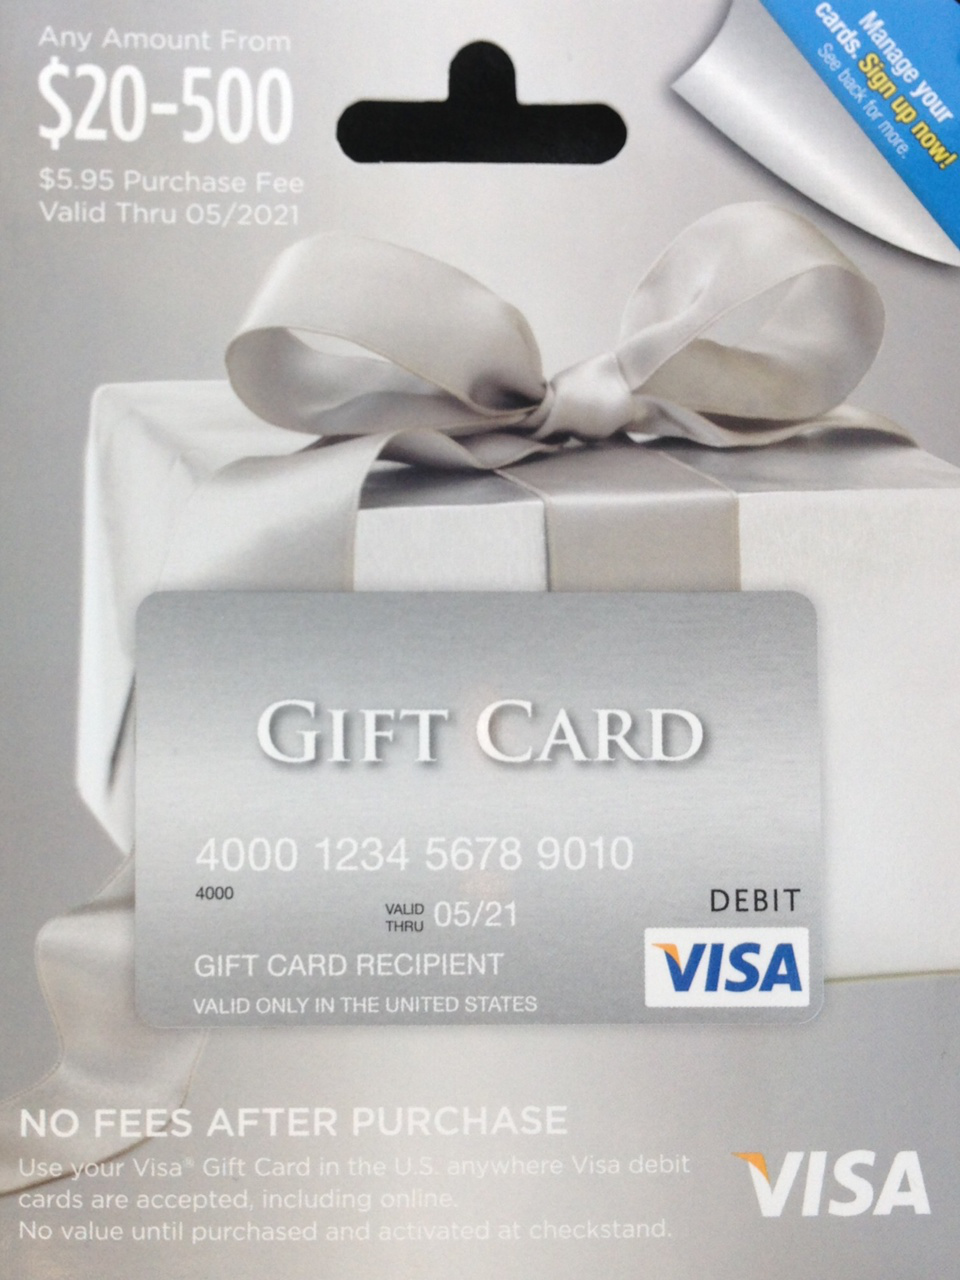 Relentless Financial Improvement: Visa and Mastercard gift cards now